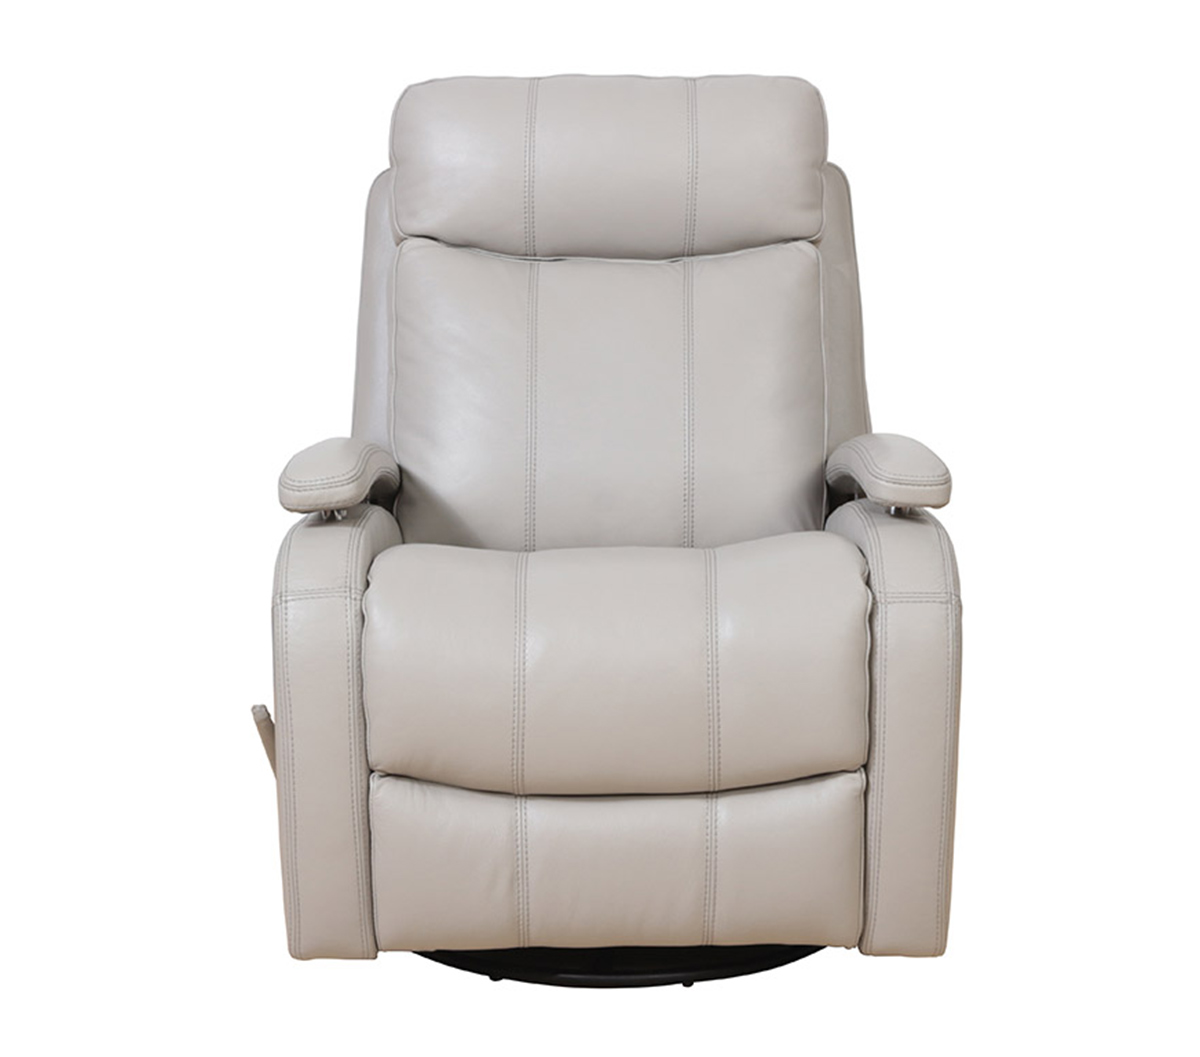 Barcalounger Duffy Swivel Glider Recliner Chair - Gable Dove/Leather Match